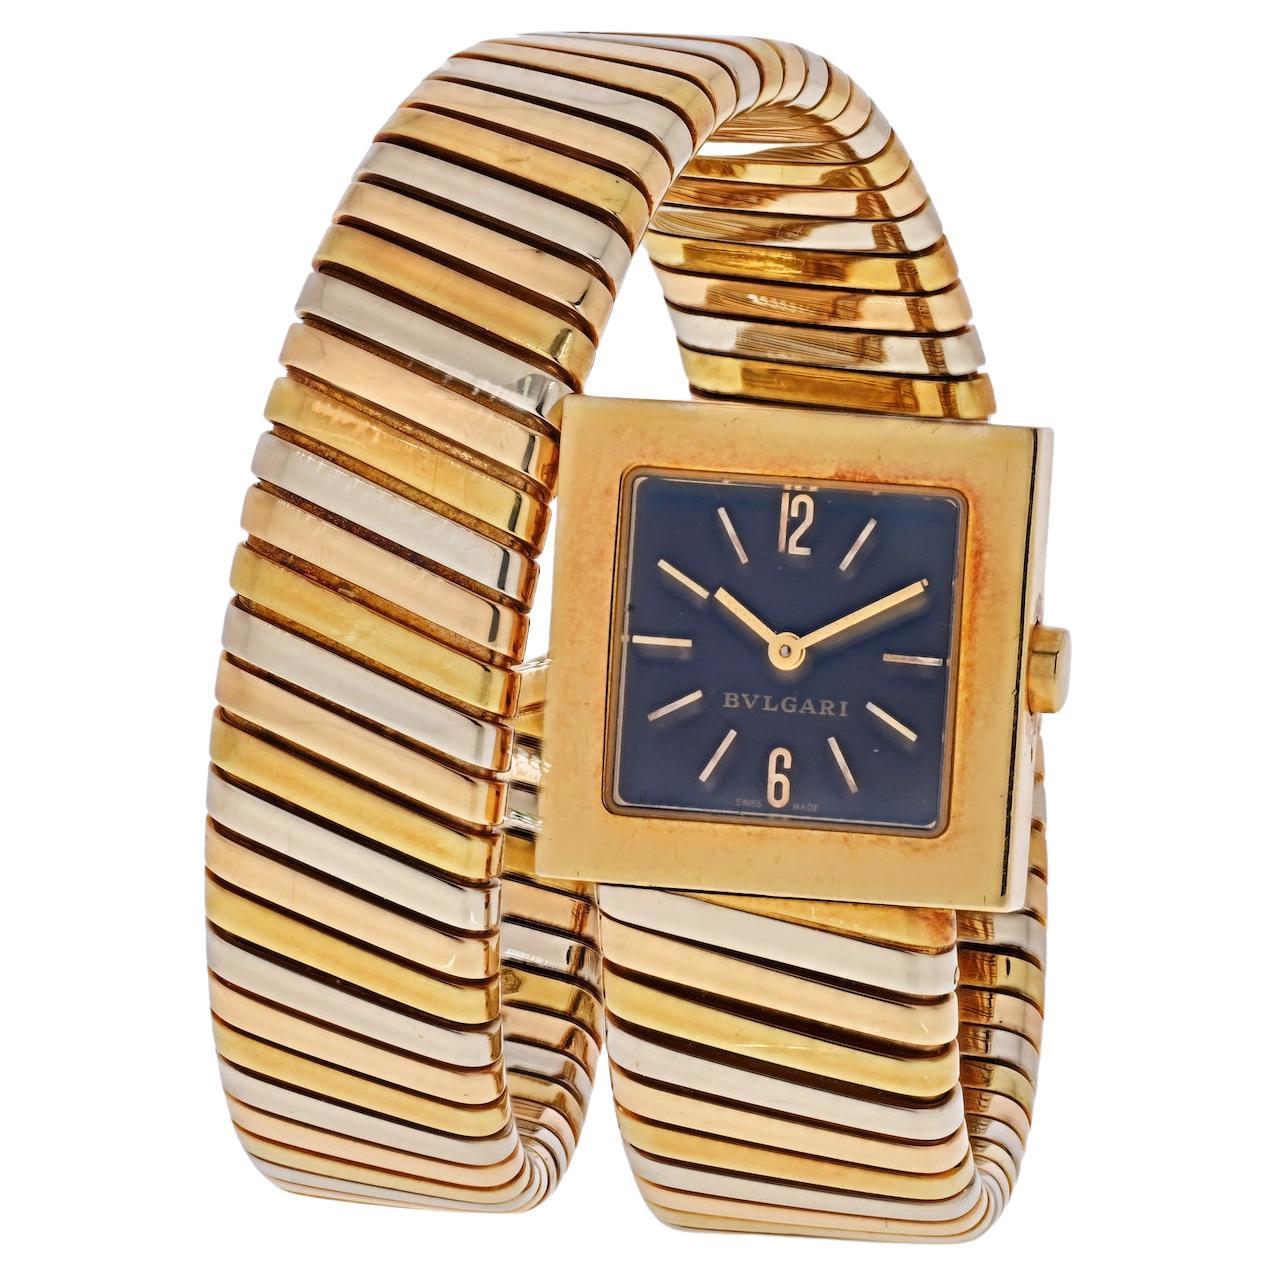 Indulge in timeless luxury with our meticulously crafted Bvlgari Tubogas Vintage Serpenti Wrapped Bracelet Watch, a masterpiece of design and engineering in tri-color gold. This iconic Bvlgari piece showcases the Tubogas Serpenti bracelet, a symbol